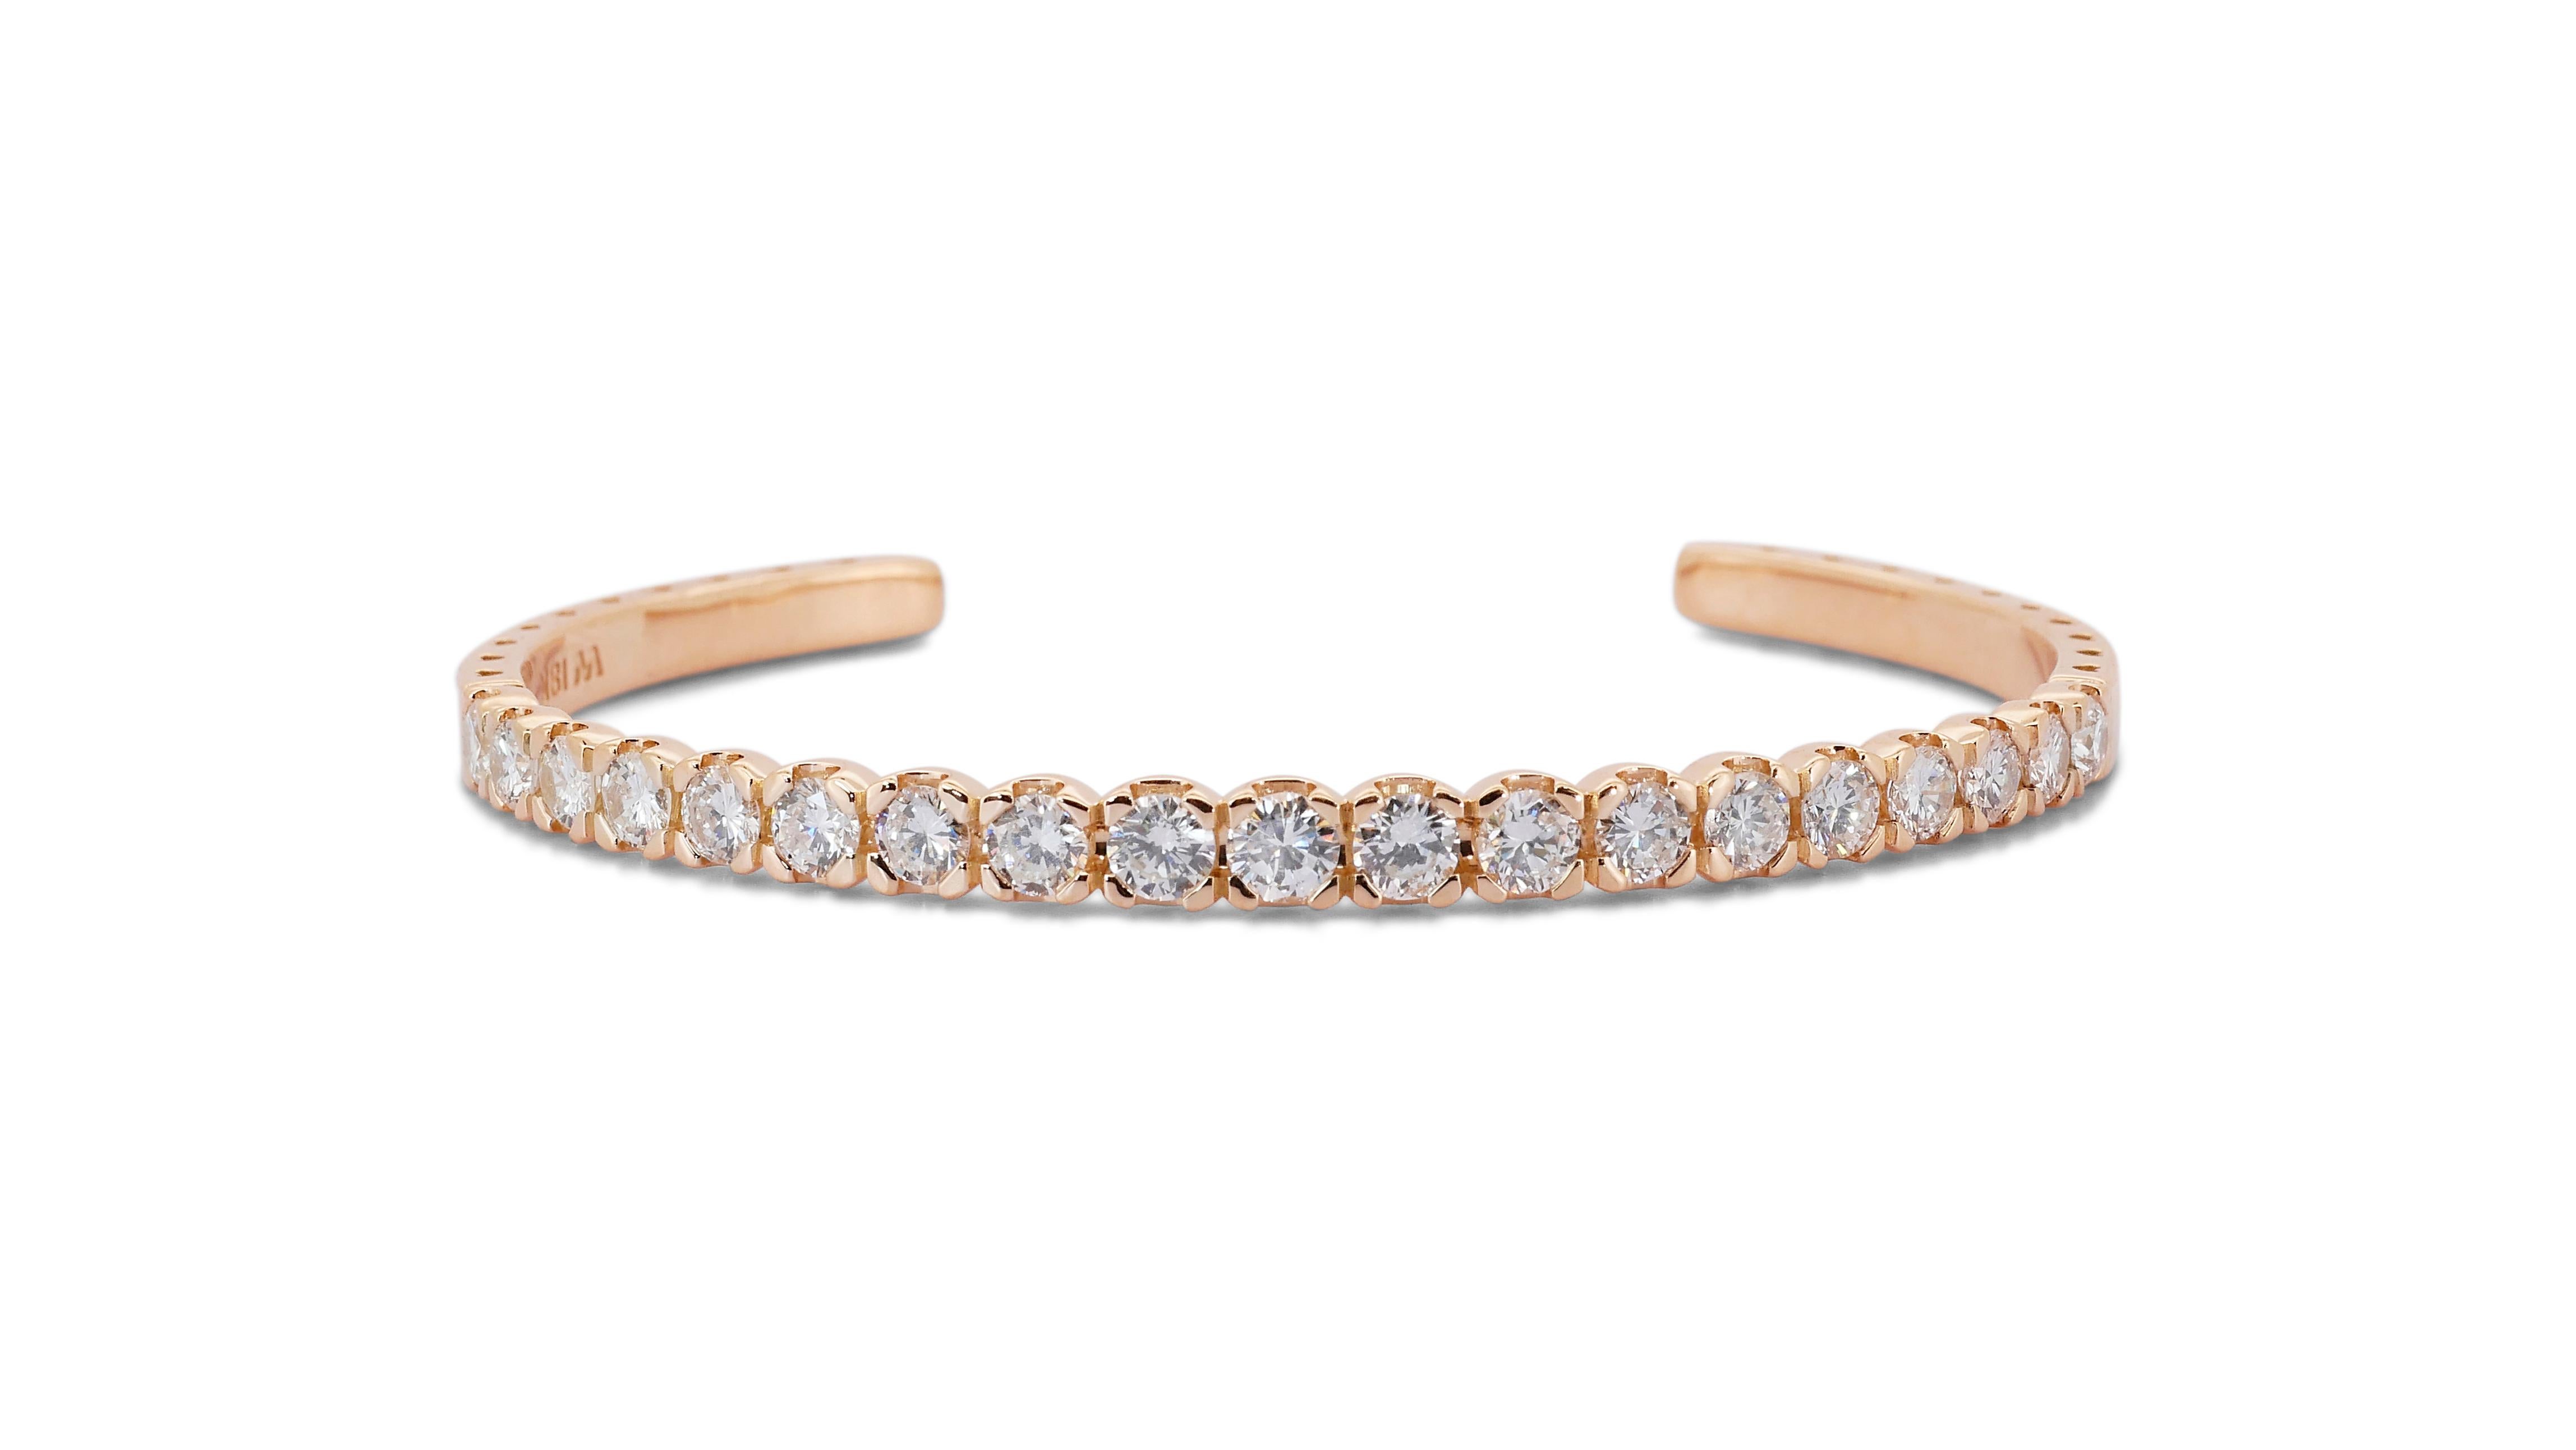 Exquisite 18kt. Yellow Gold Bracelet w/ 4.30 ct Total Natural Diamonds IGI Cert In New Condition For Sale In רמת גן, IL